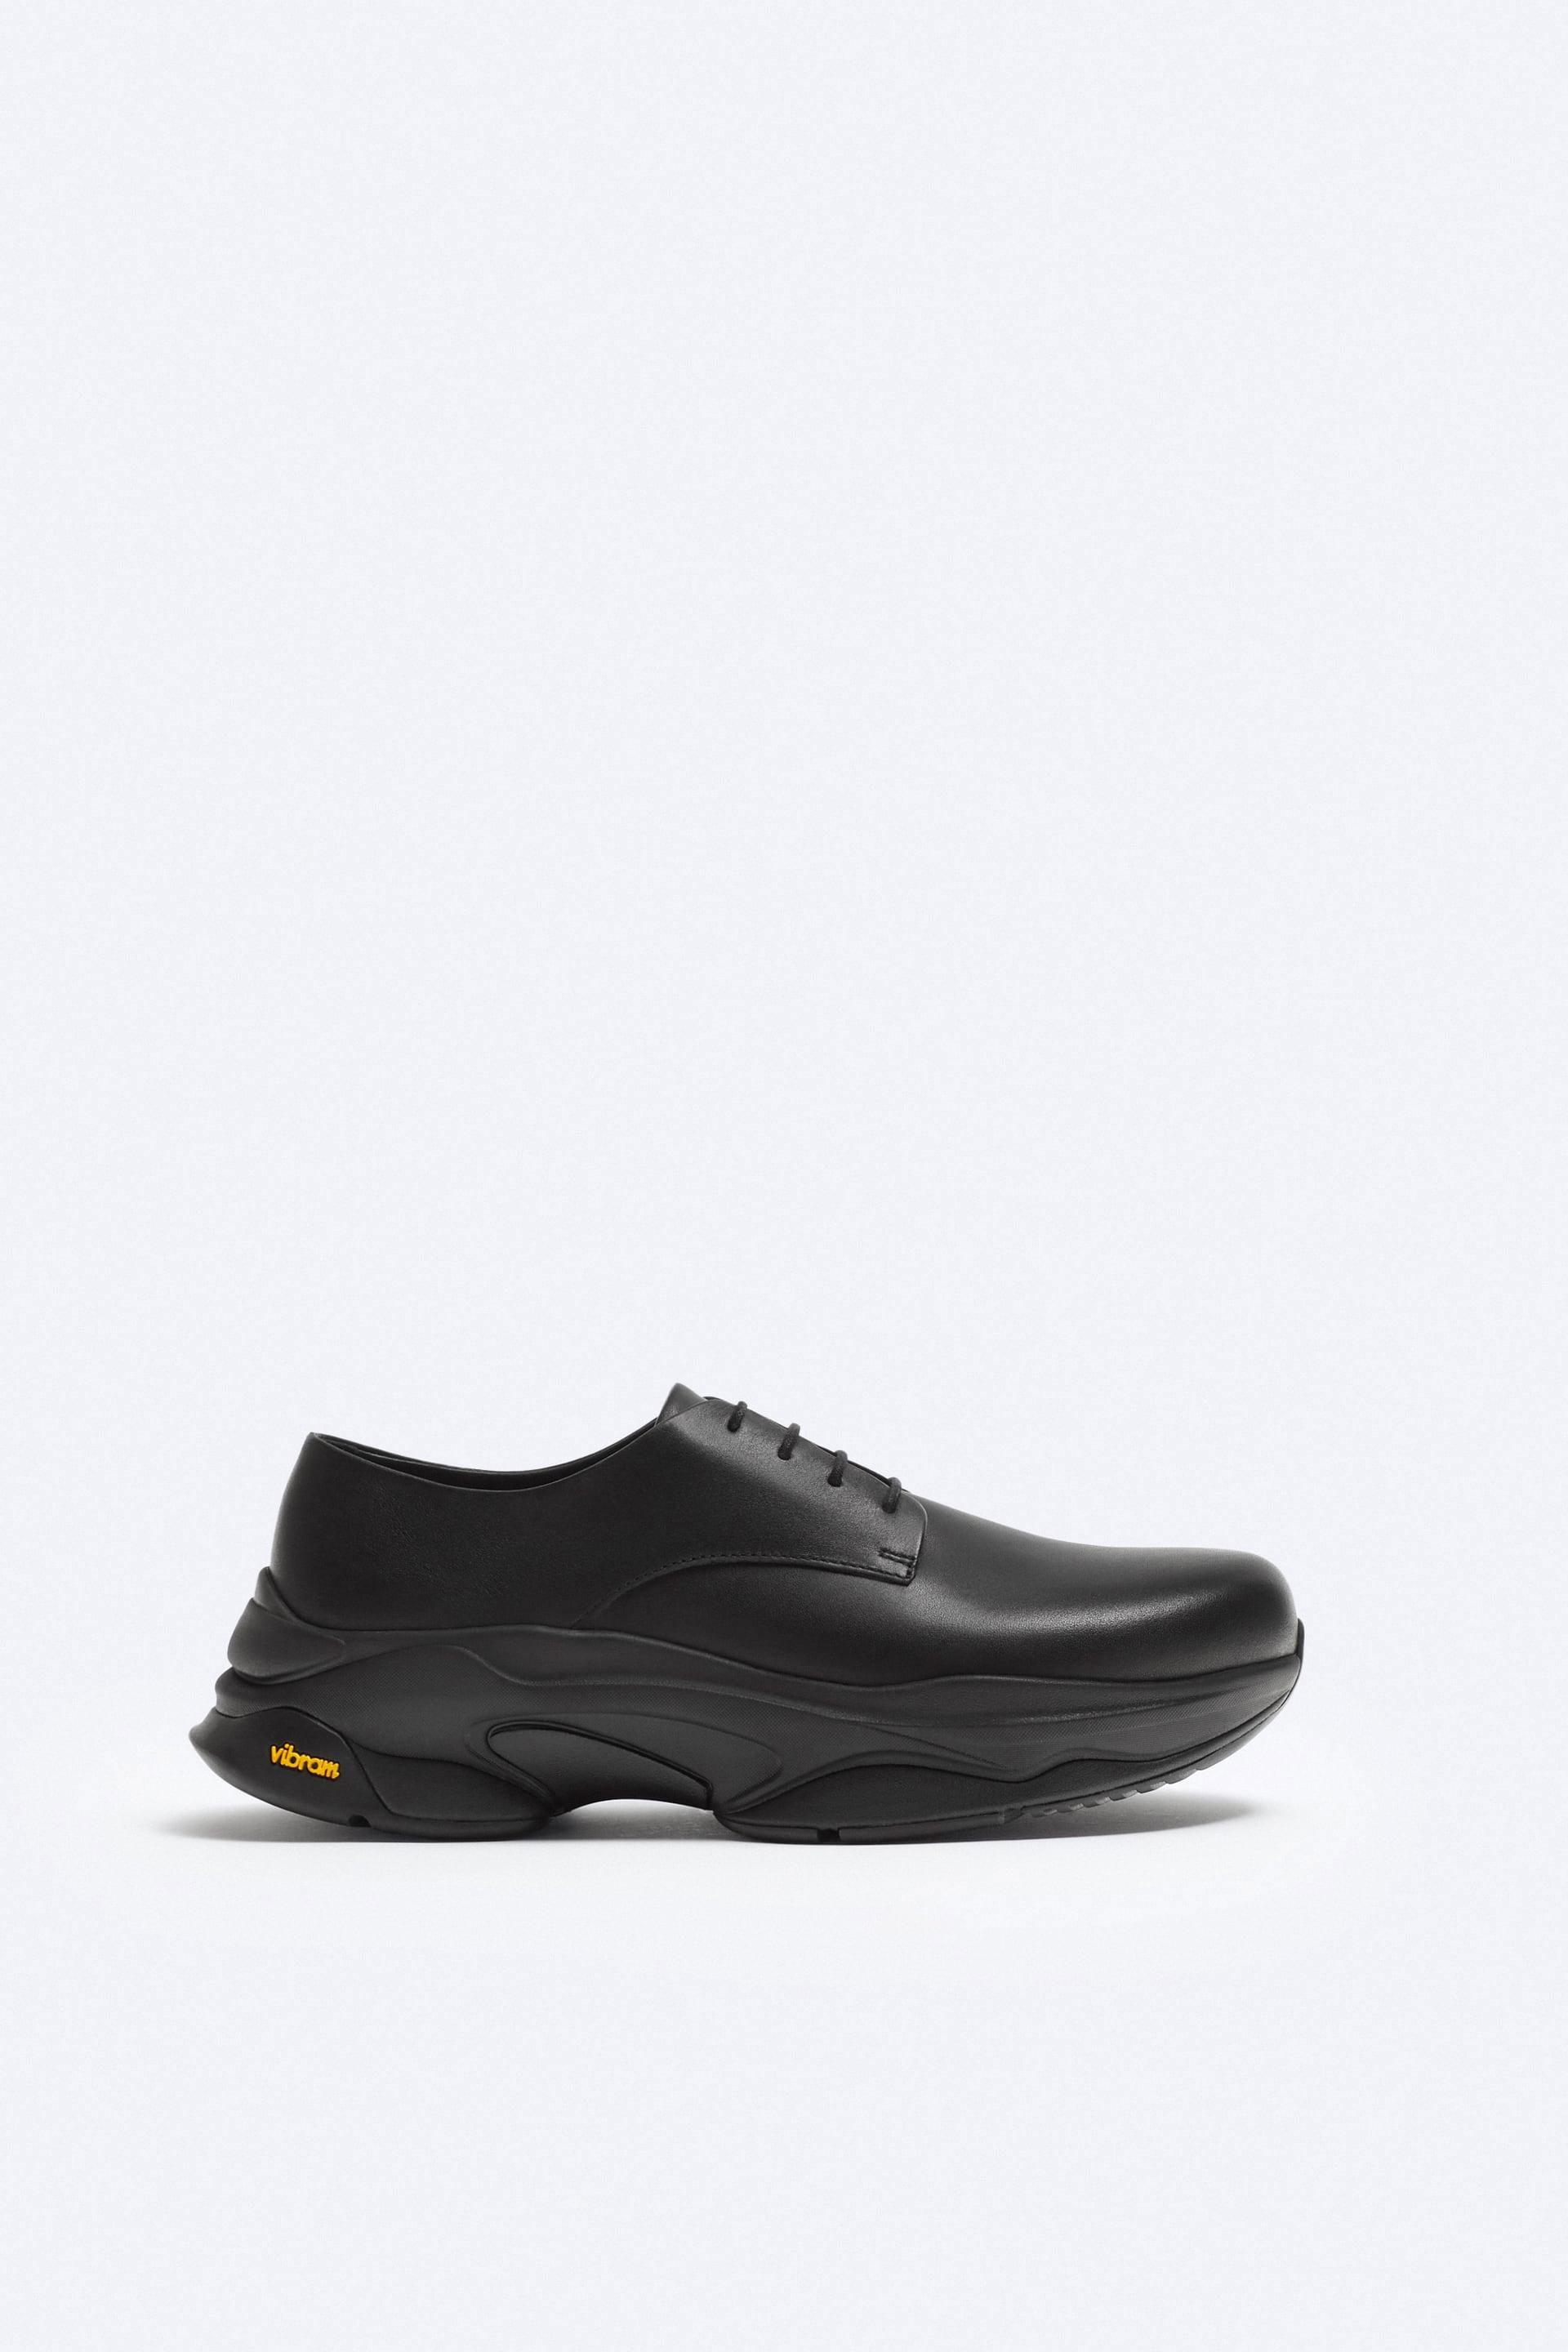 VIBRAM® LEATHER SHOES by ZARA